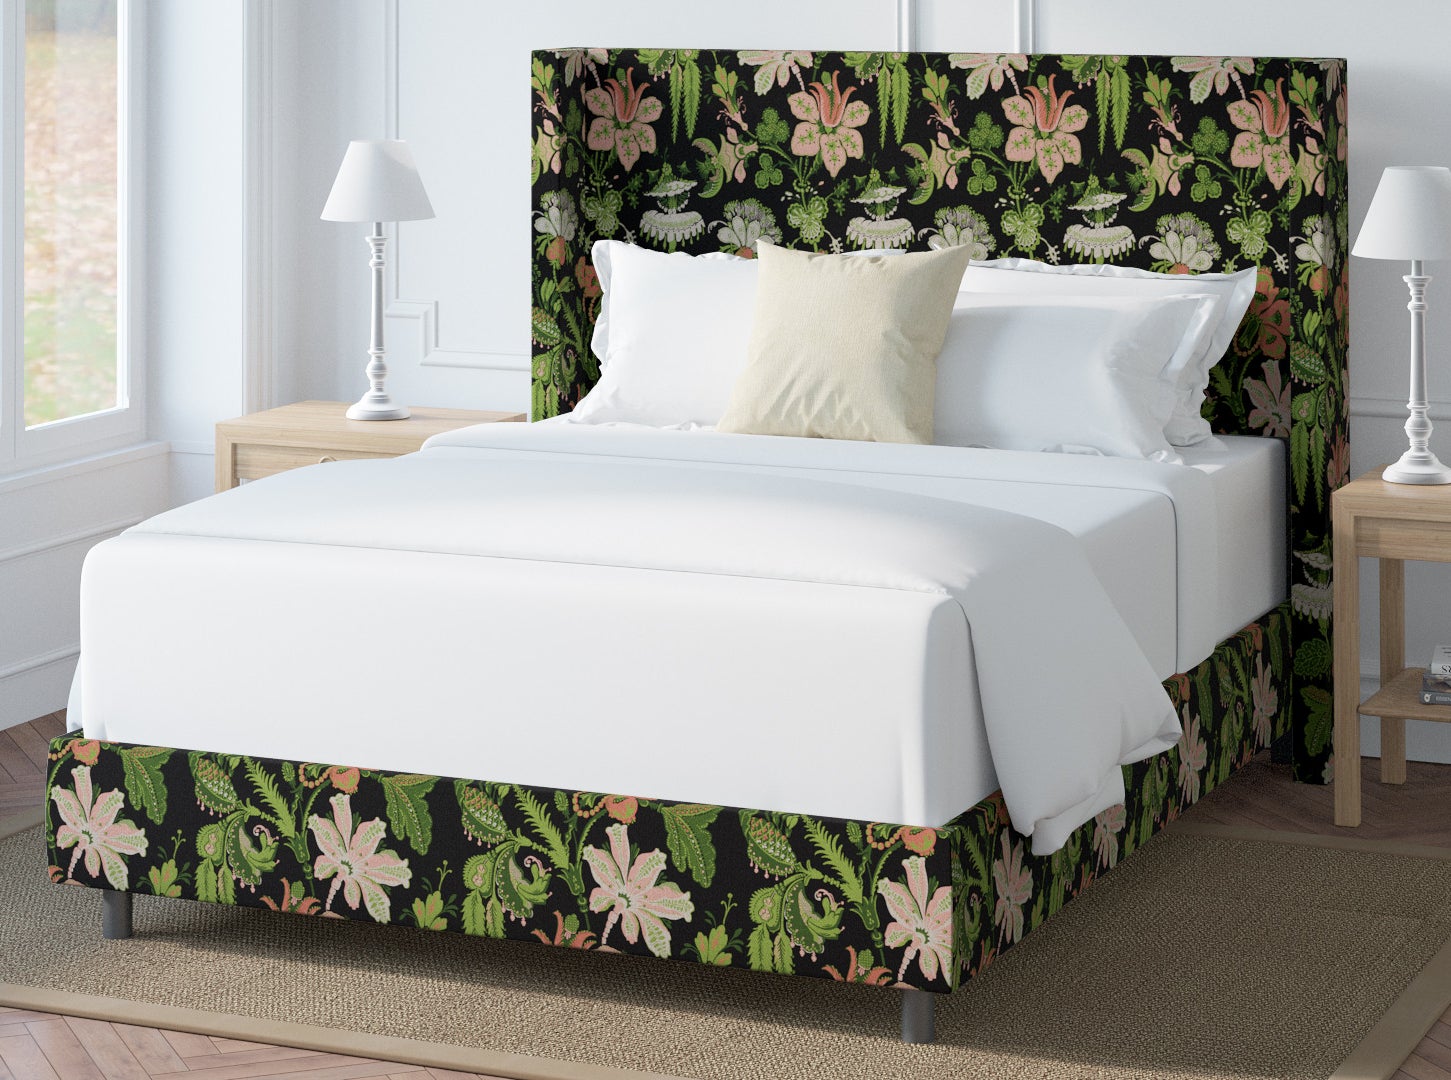 bed frame and headboard upholstered in a black, pink, and green floral pattern